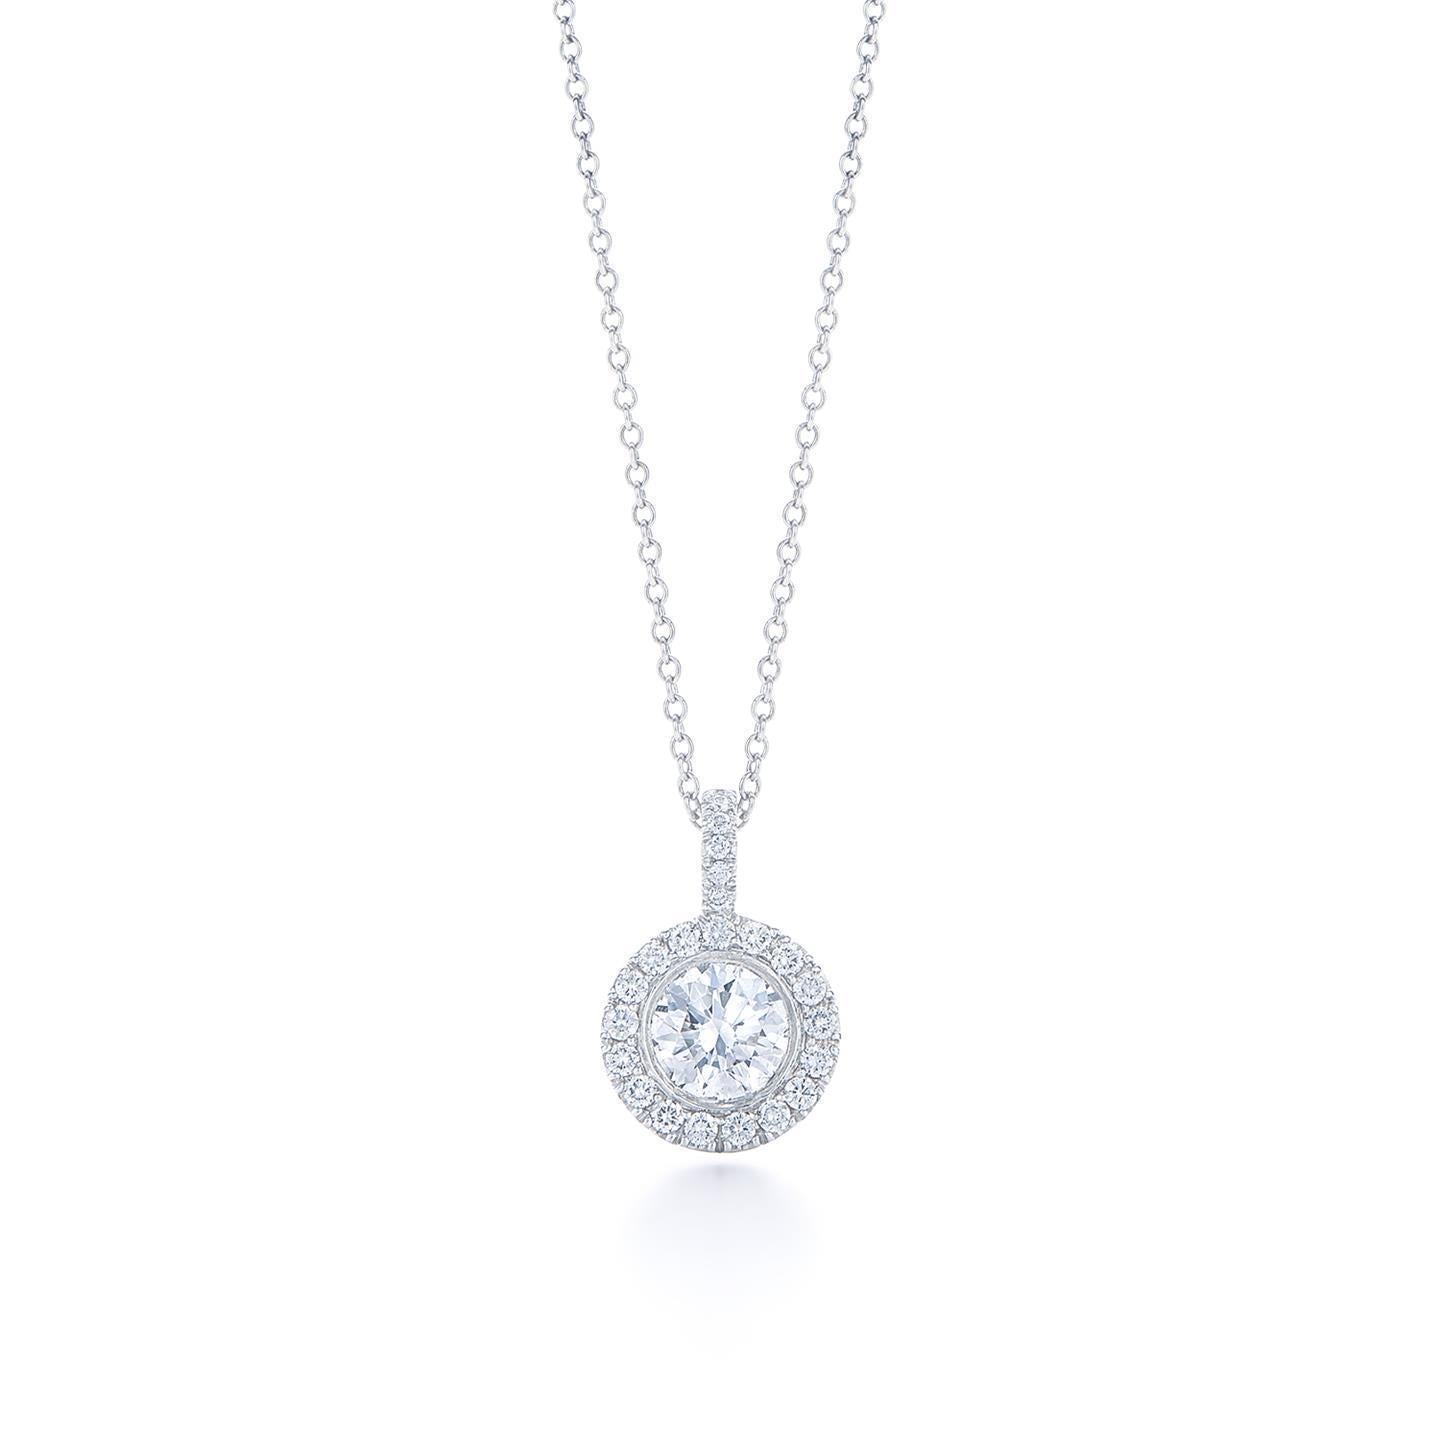 White Gold Real Diamonds Pendant Necklace Chain 1.80 Carats Prong Set